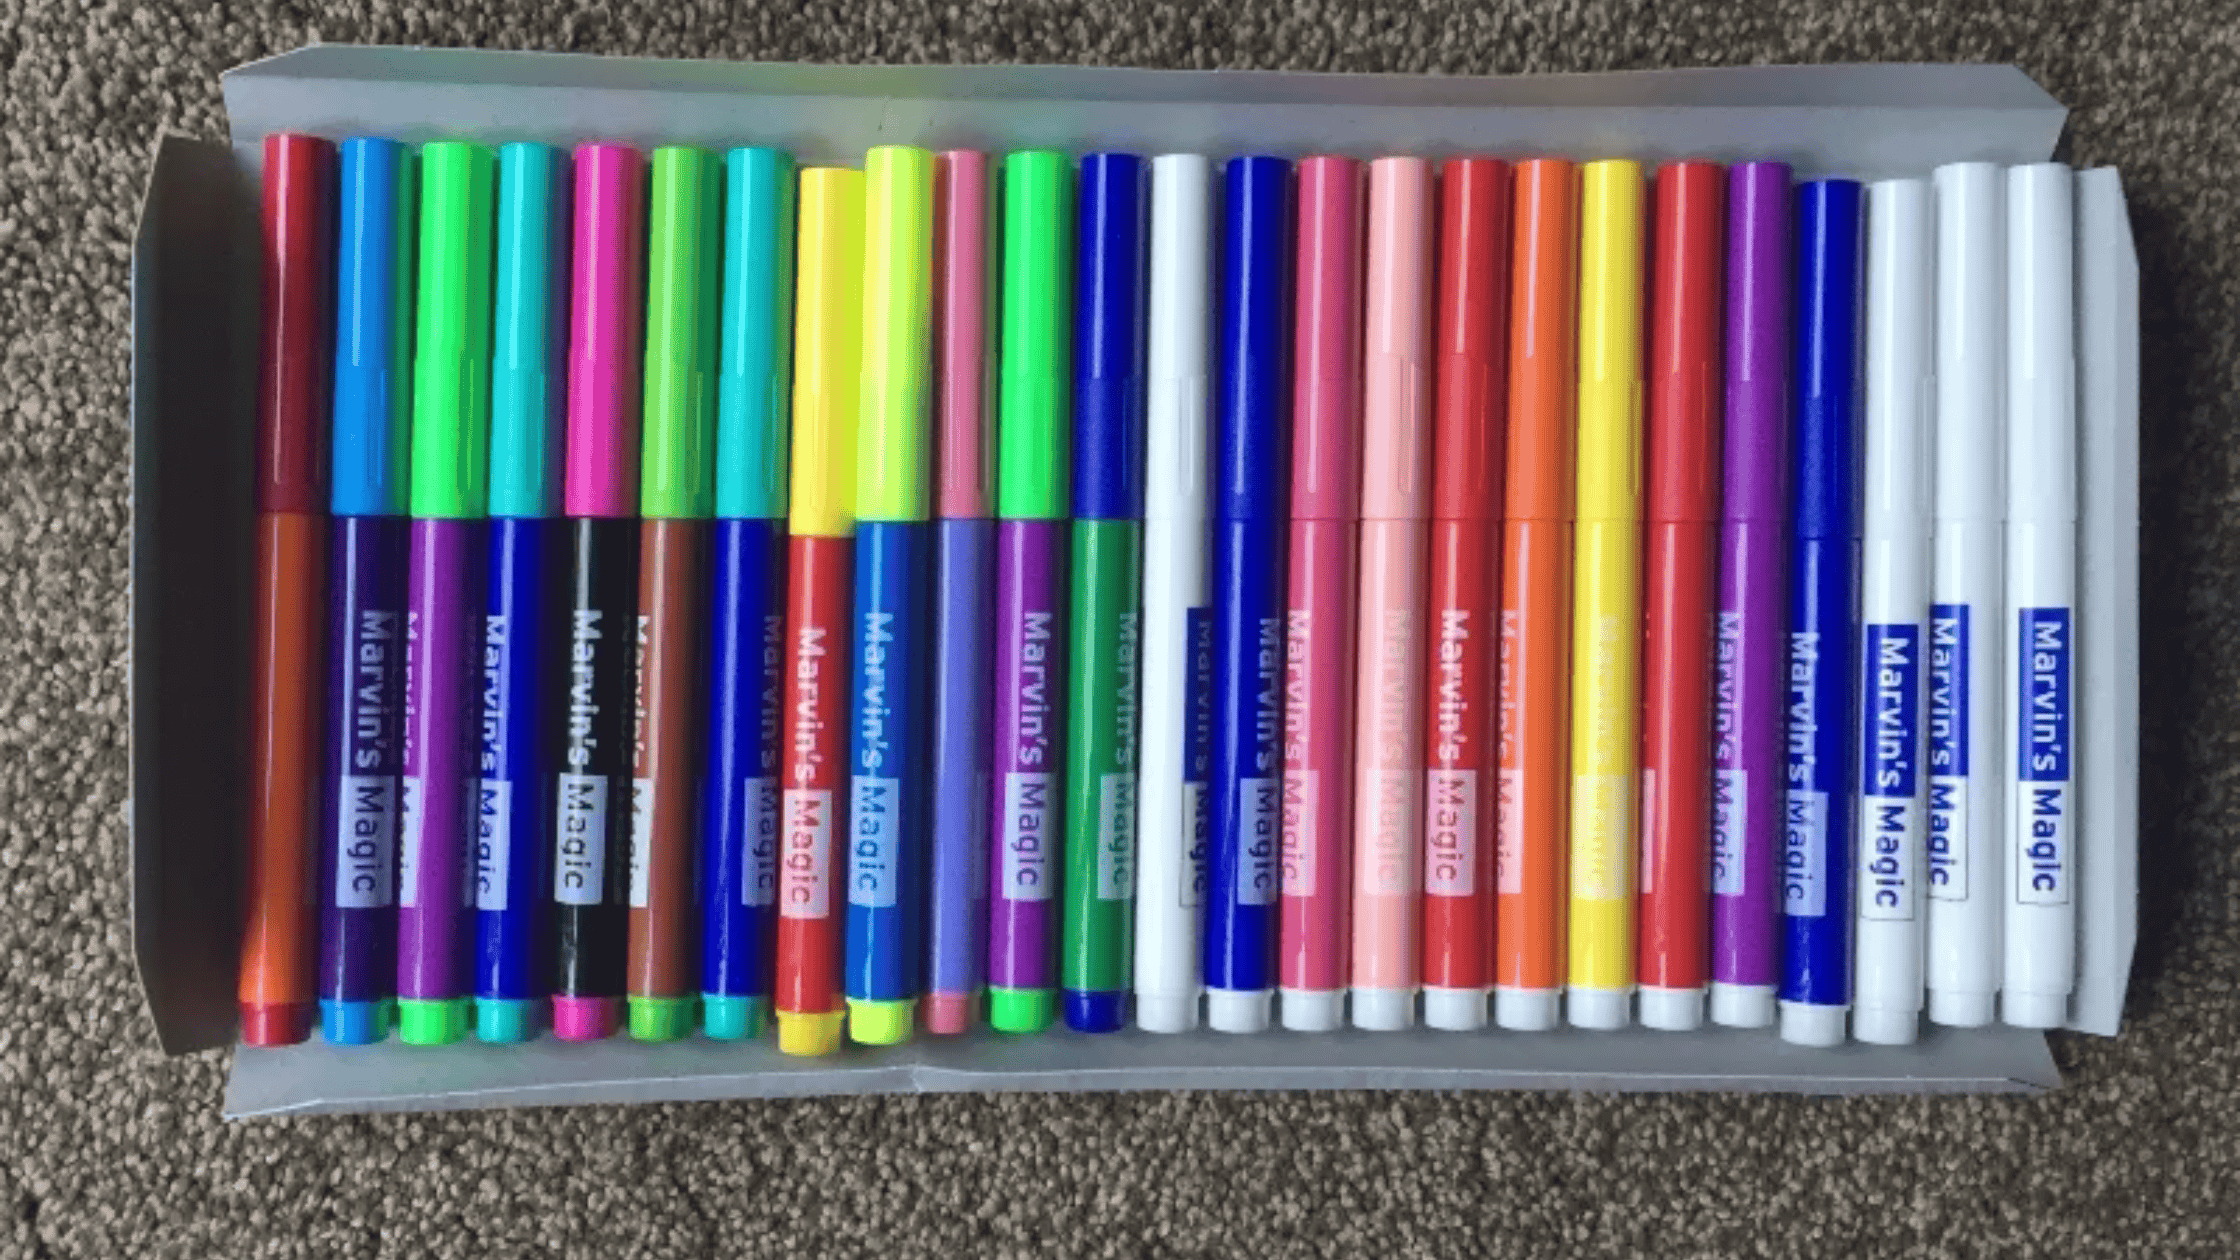 Pros and Cons of Marvin Magic Markers